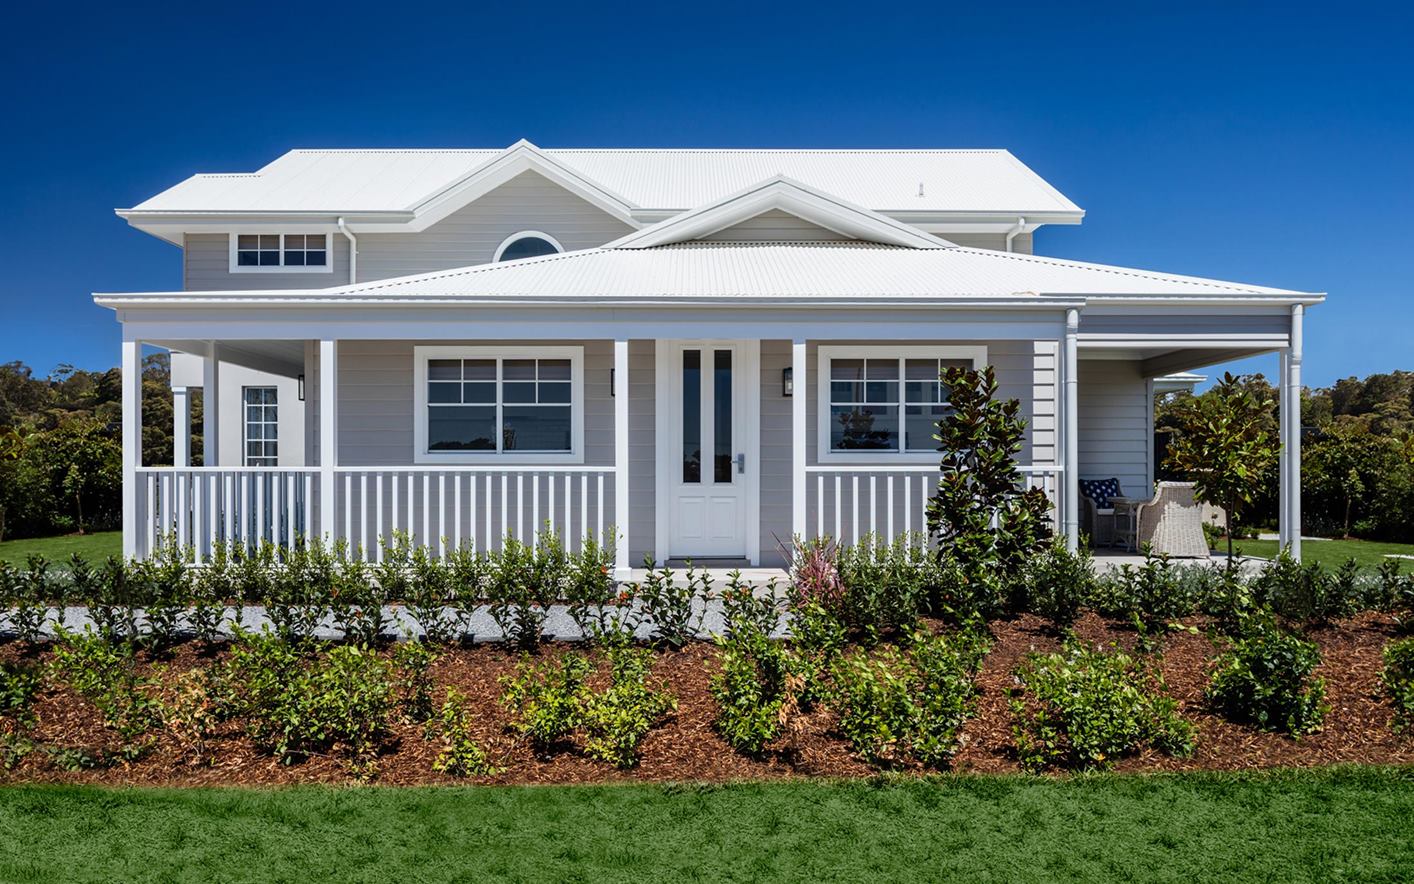 Large Hamptons Style Home Hamptons Style Homes Hamptons House | Images ...